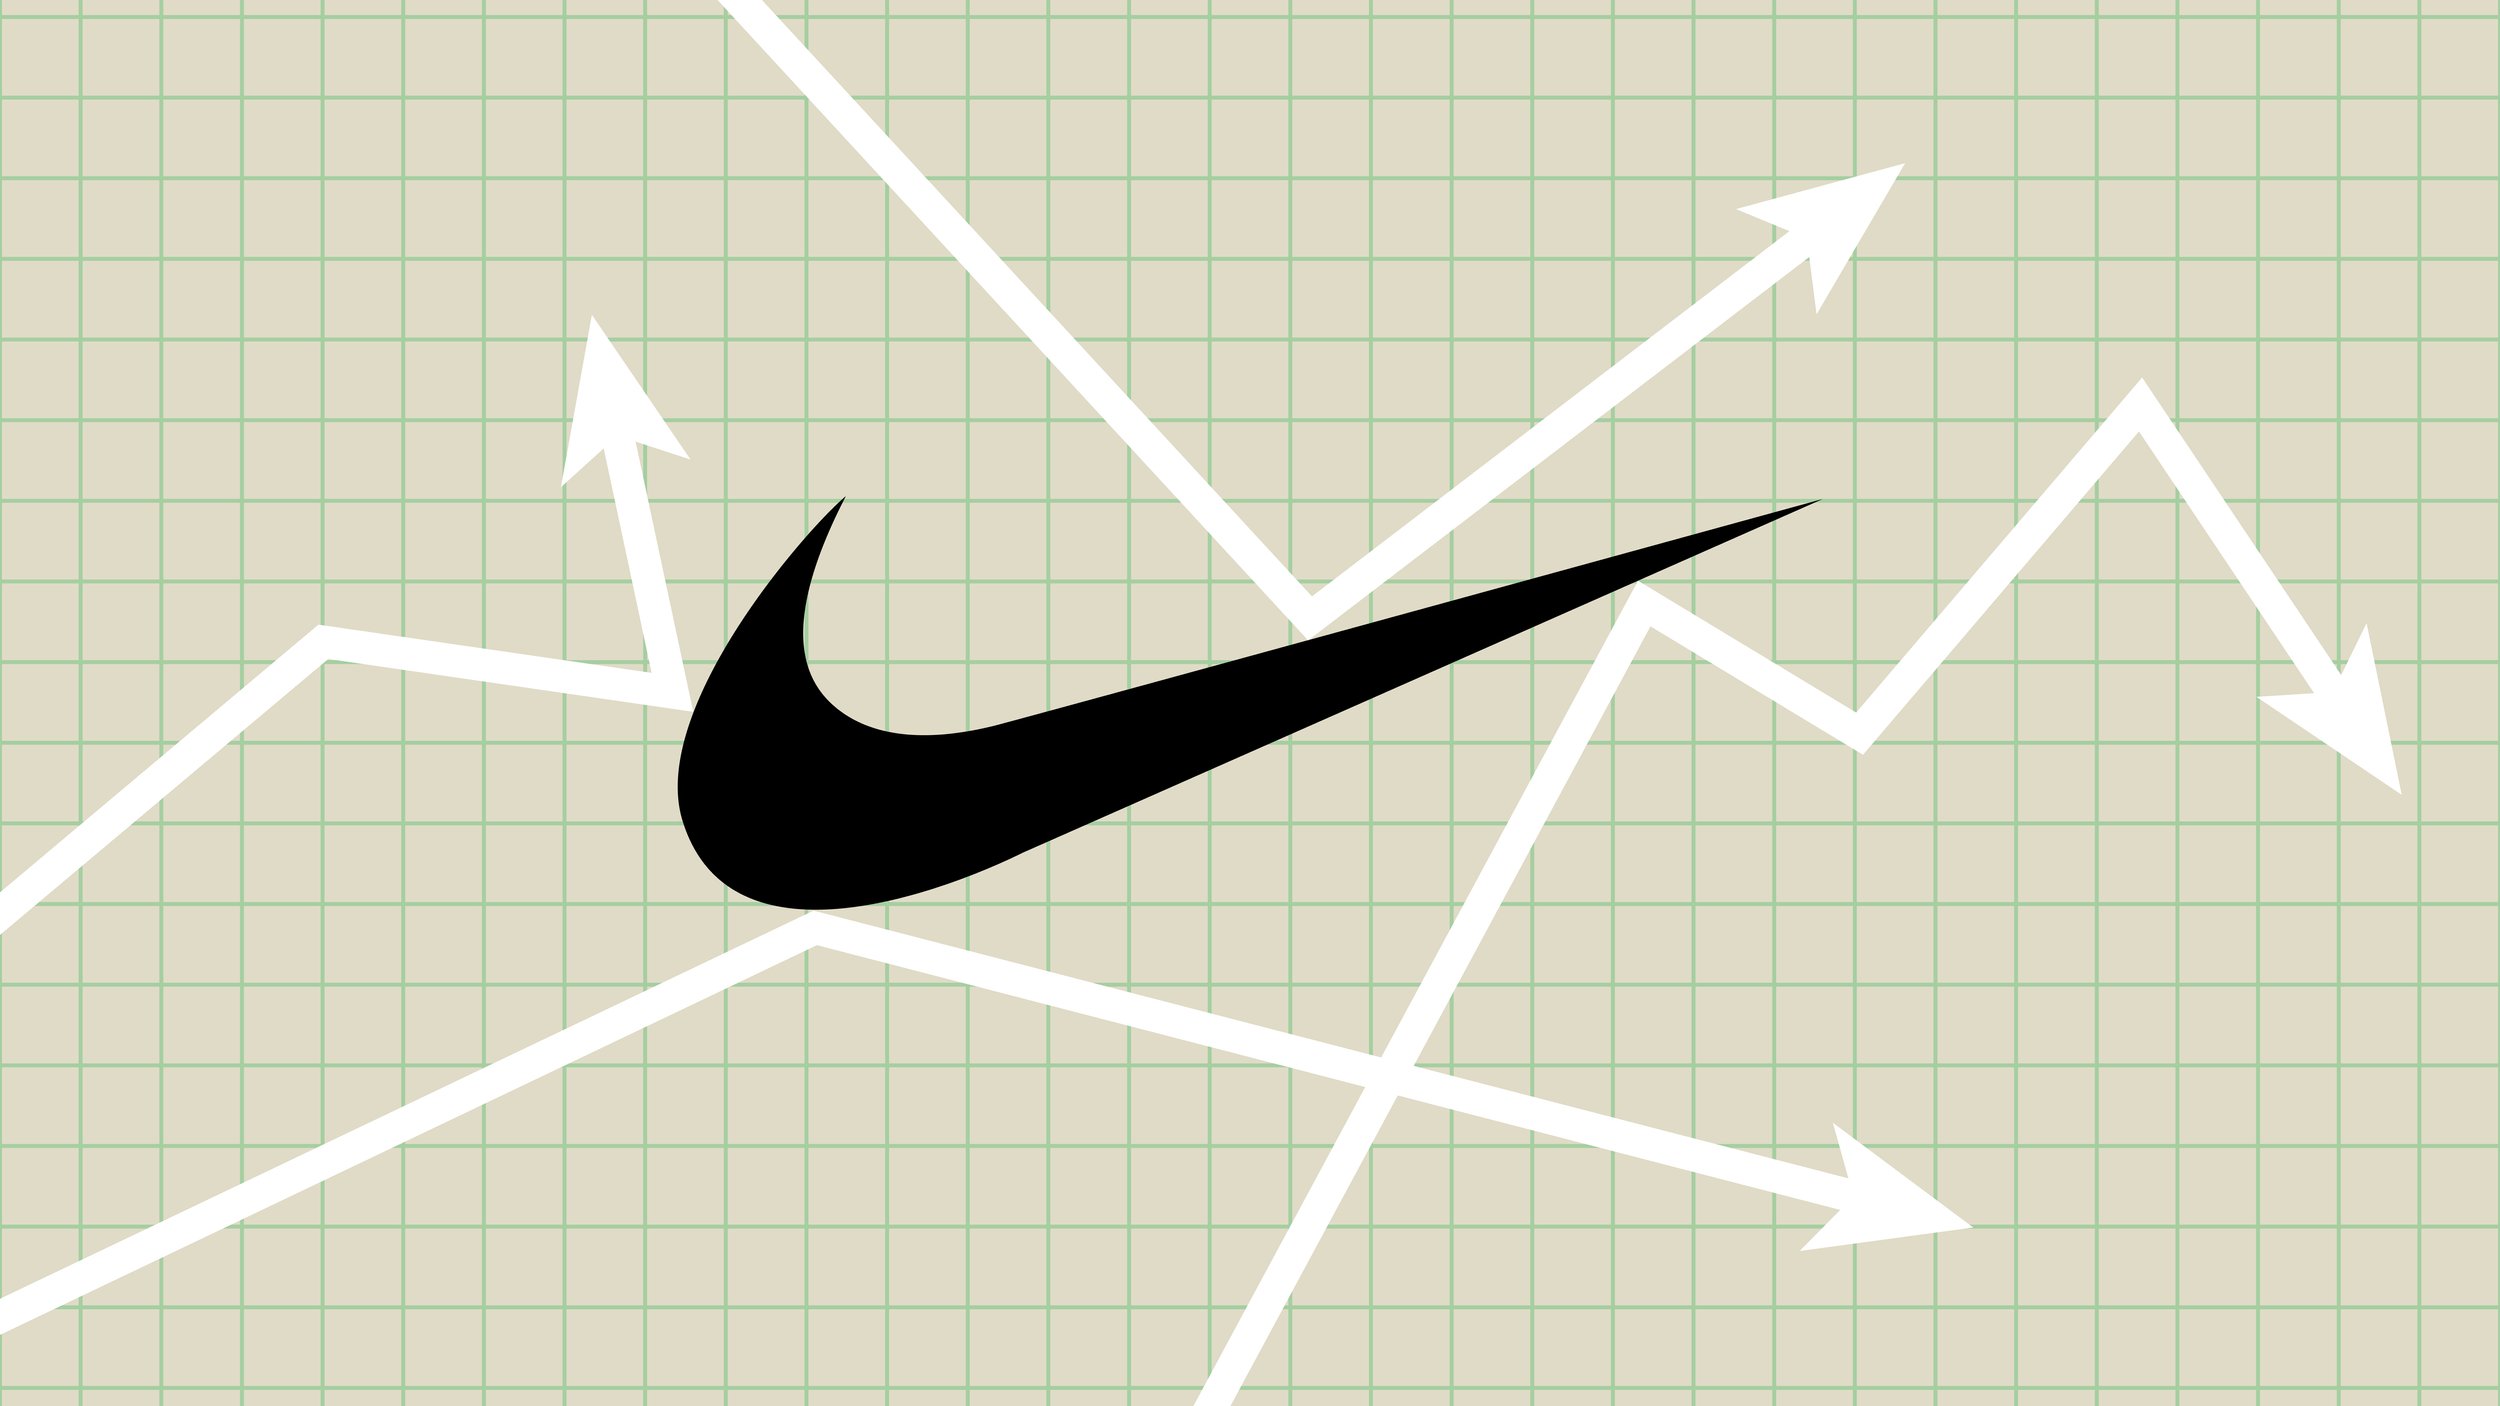 Restringir Apariencia Comunista How Long Does it Take for Nike Stock Downturns to Recover? — Human Investing